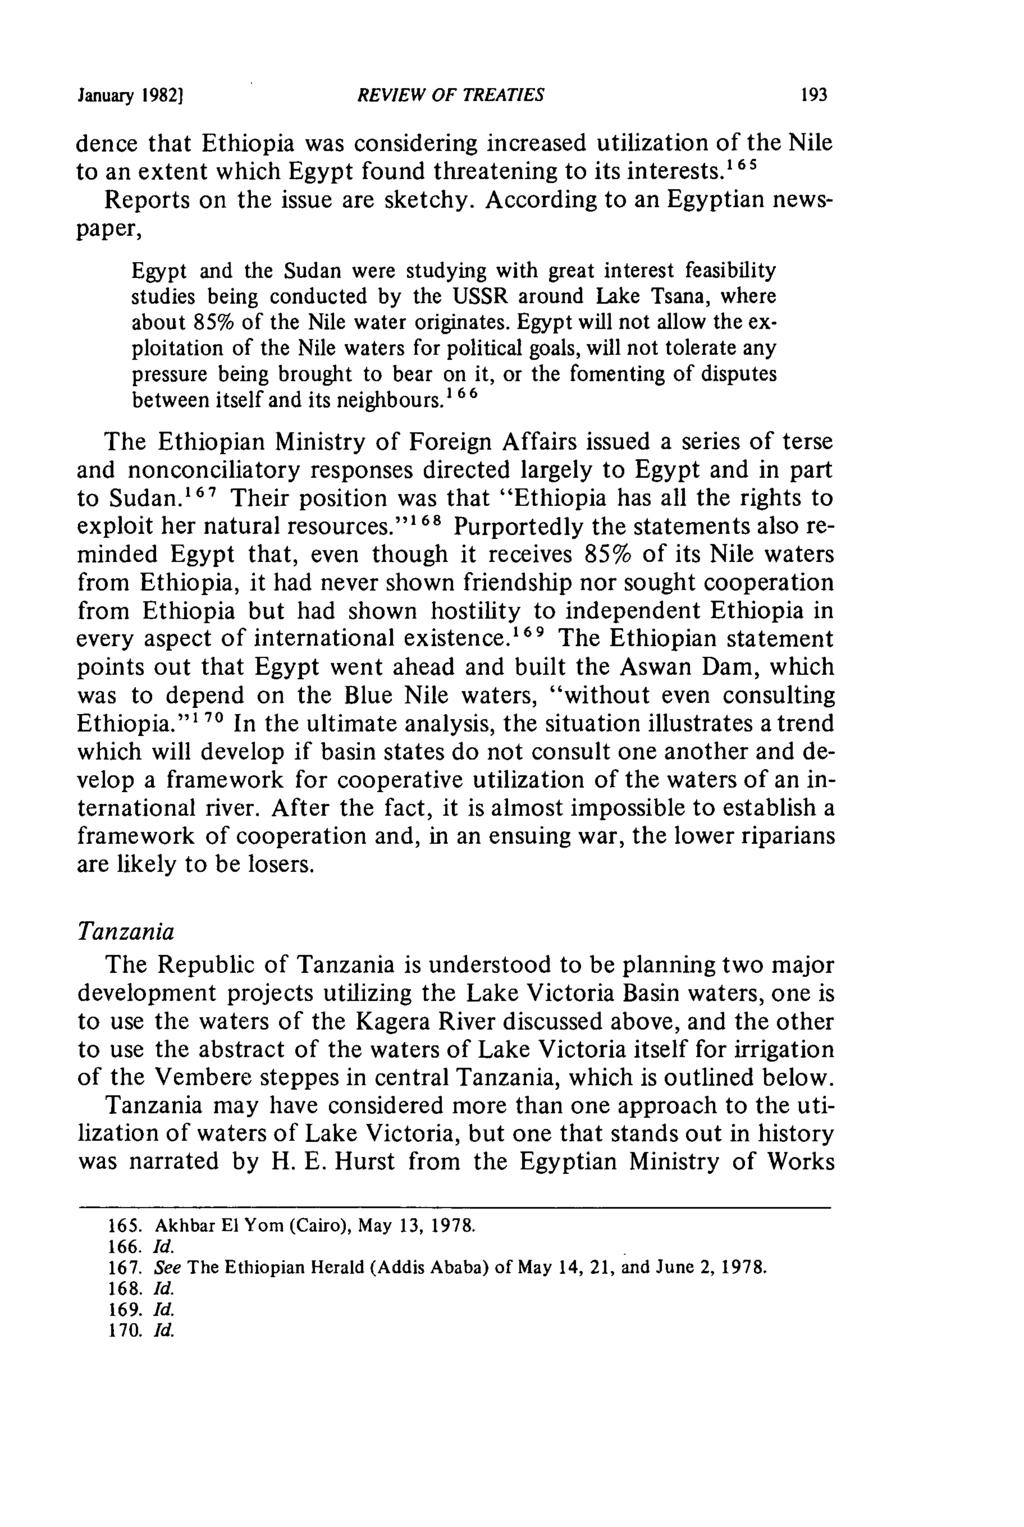 January 19821 REVIEW OF TREATIES dence that Ethiopia was considering increased utilization of the Nile to an extent which Egypt found threatening to its interests.